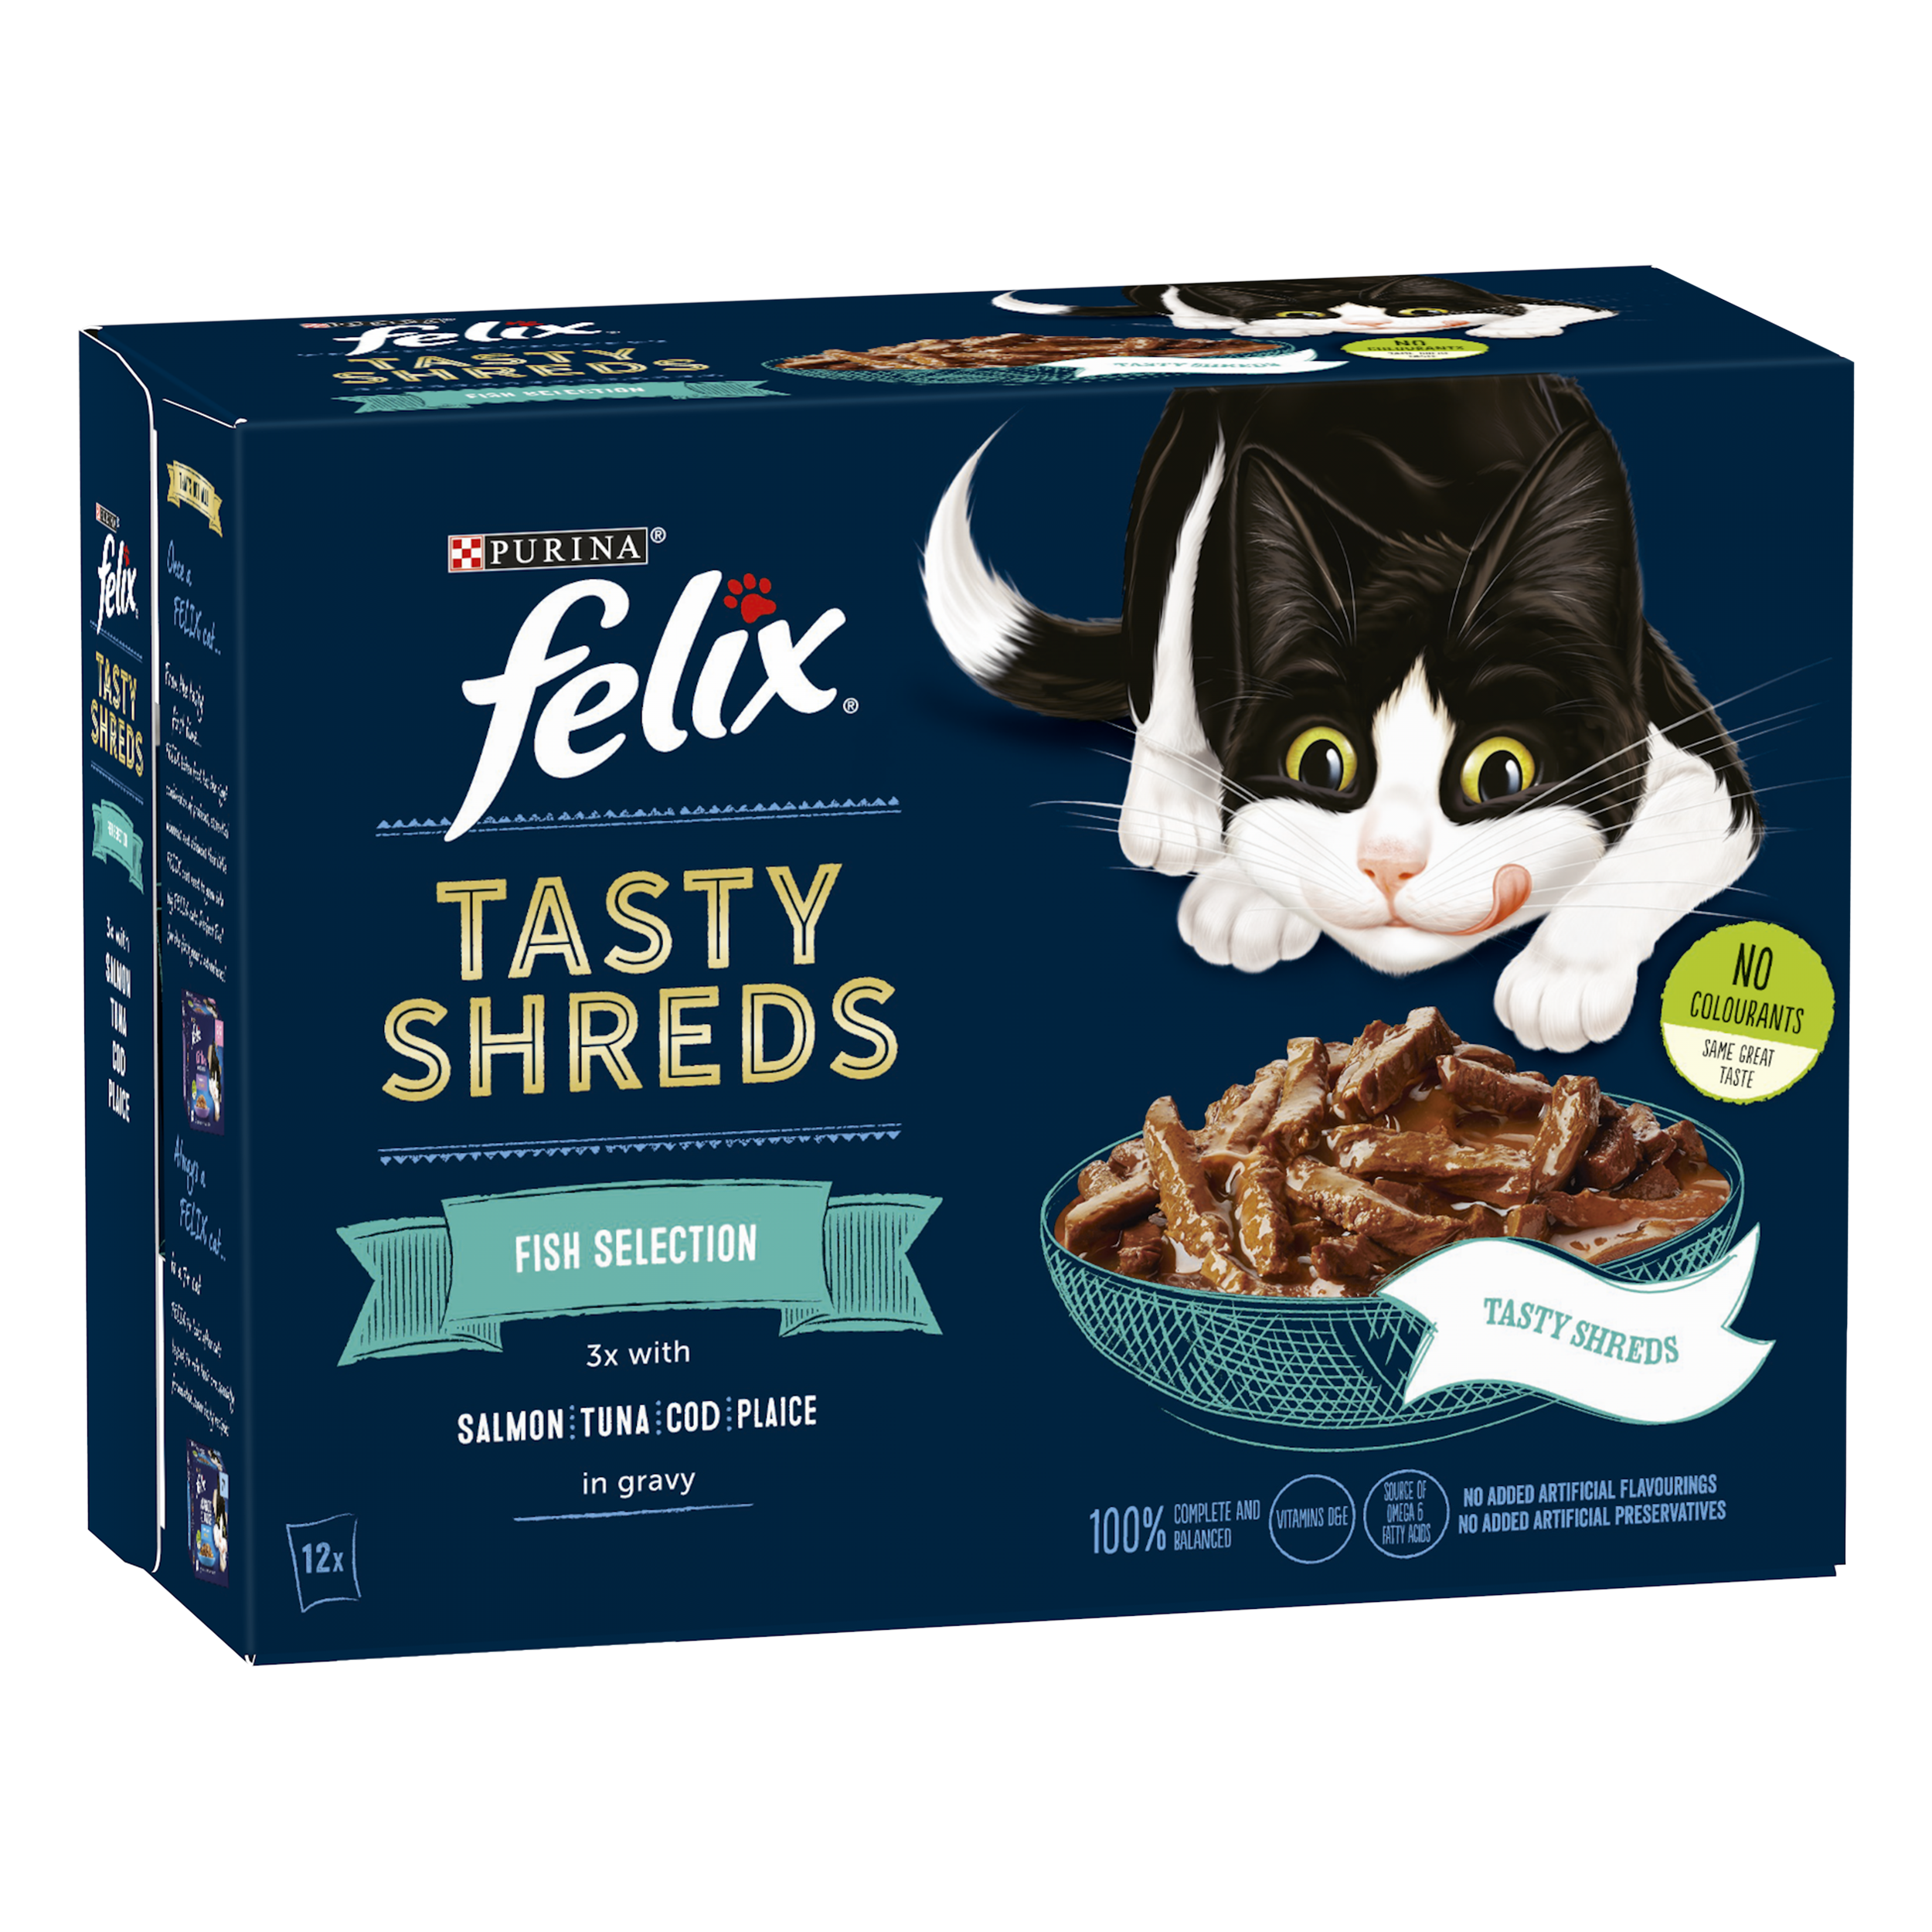 Purina Felix® Tasty Shreds Multipack Fish Selection 80g, Pack of 12